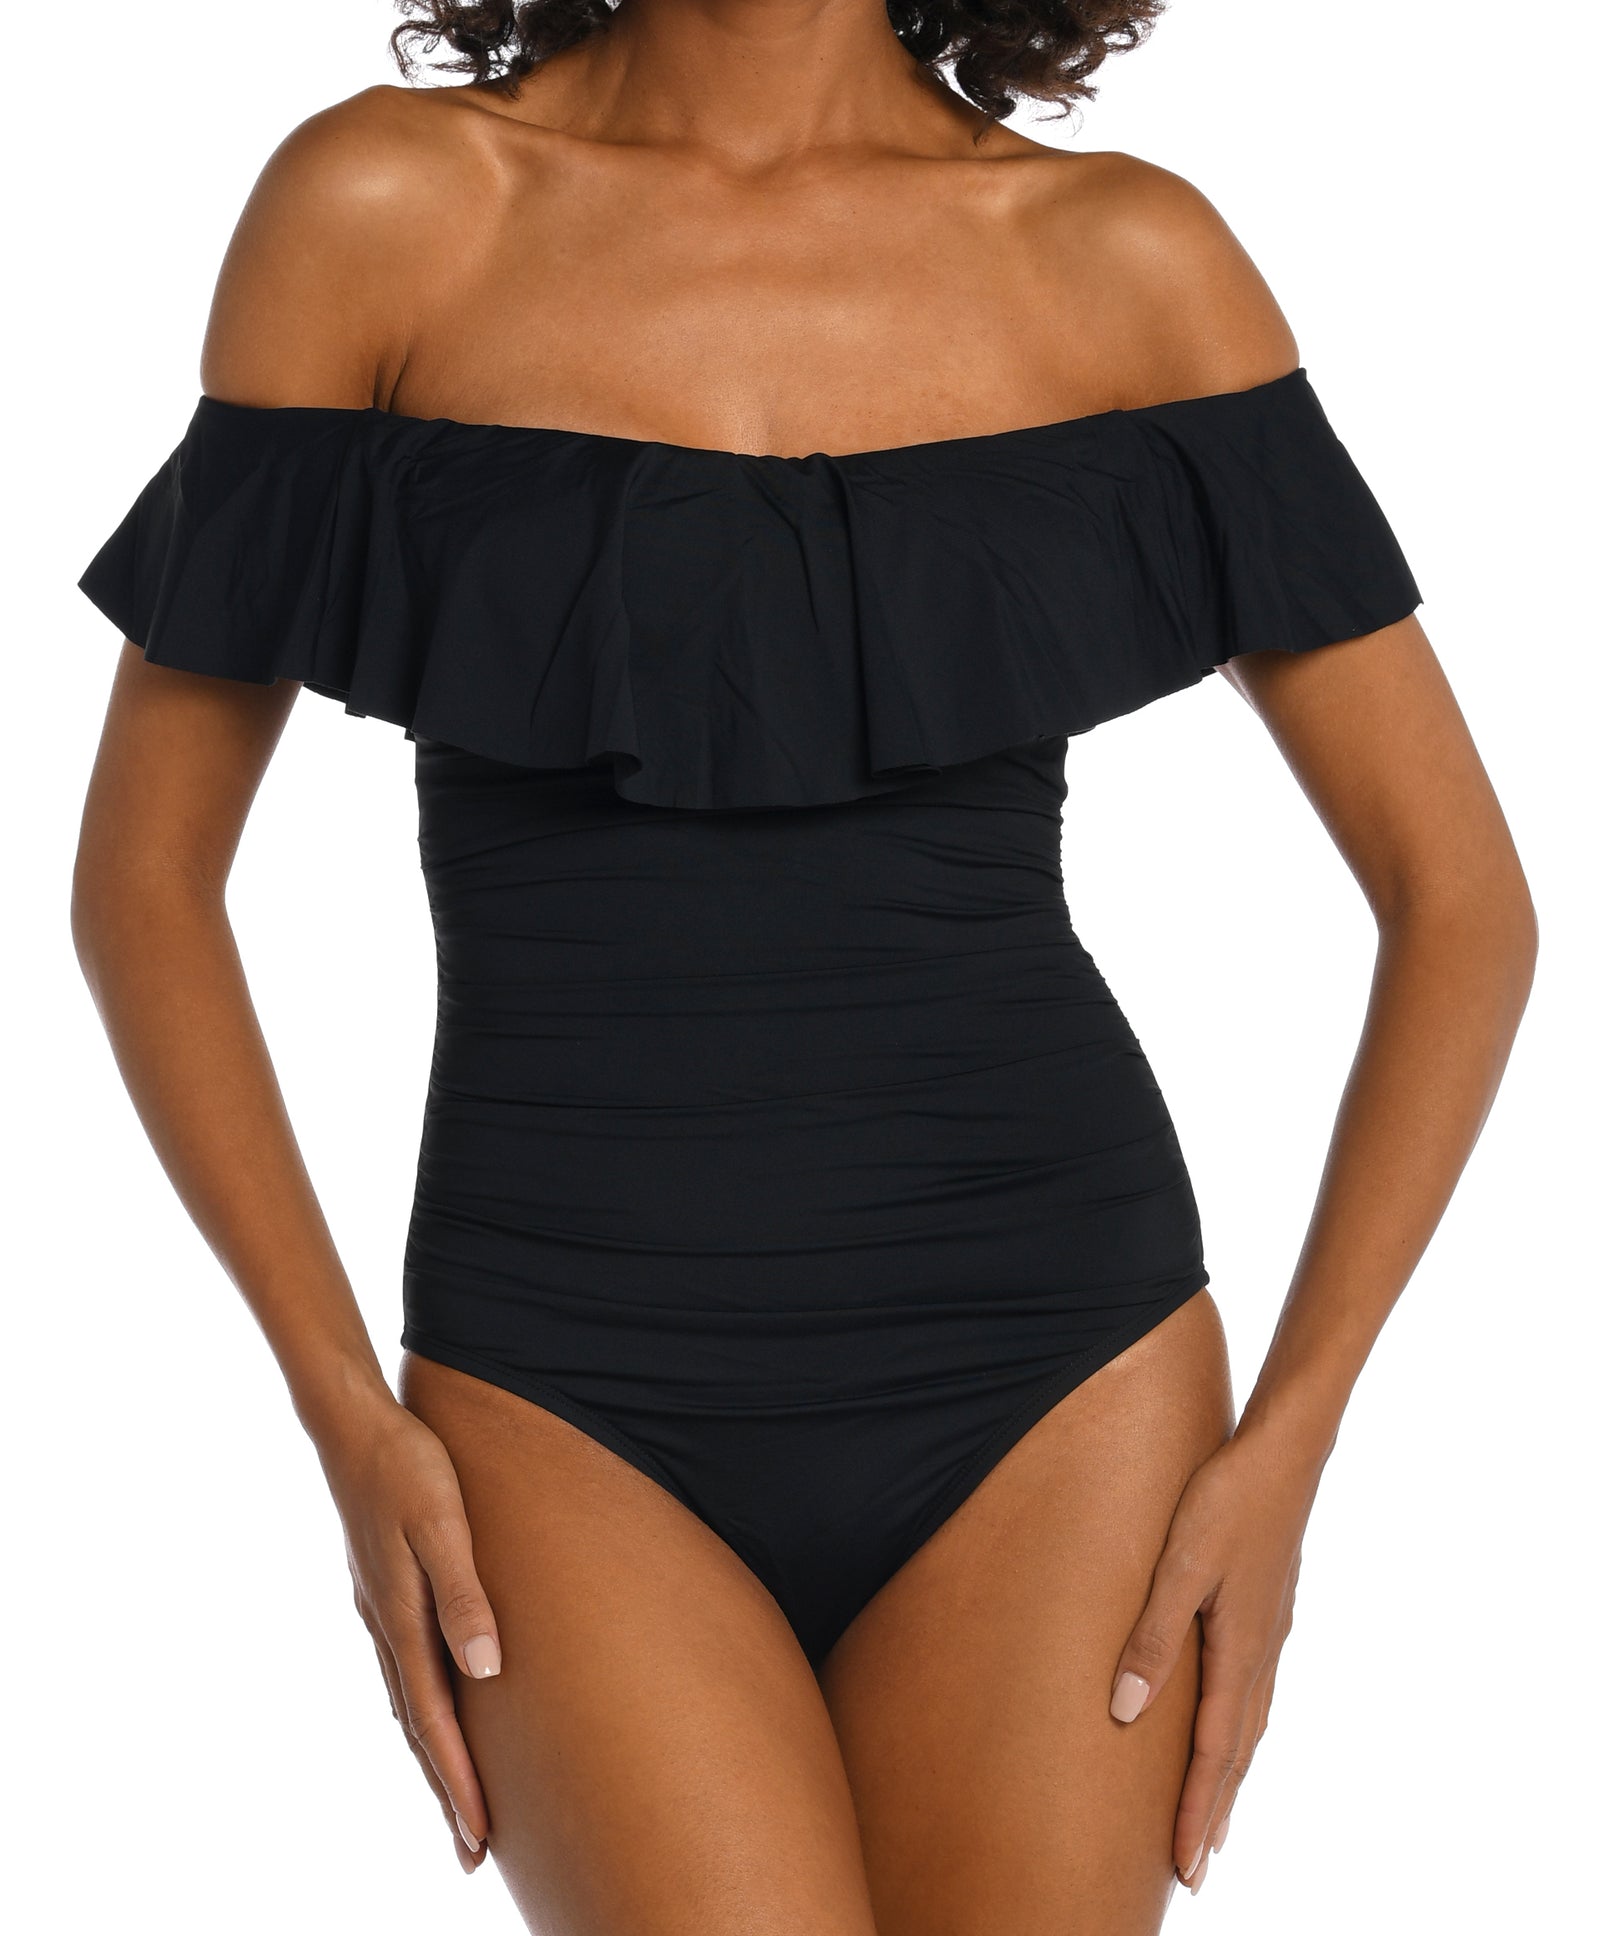 Island Goddess Collection  Off the Shoulder Ruffle Mio One Piece   Moderate Rear Coverage   Fabric Content: 83% Nylon / 17% Elastane   Product#: LB0IG11